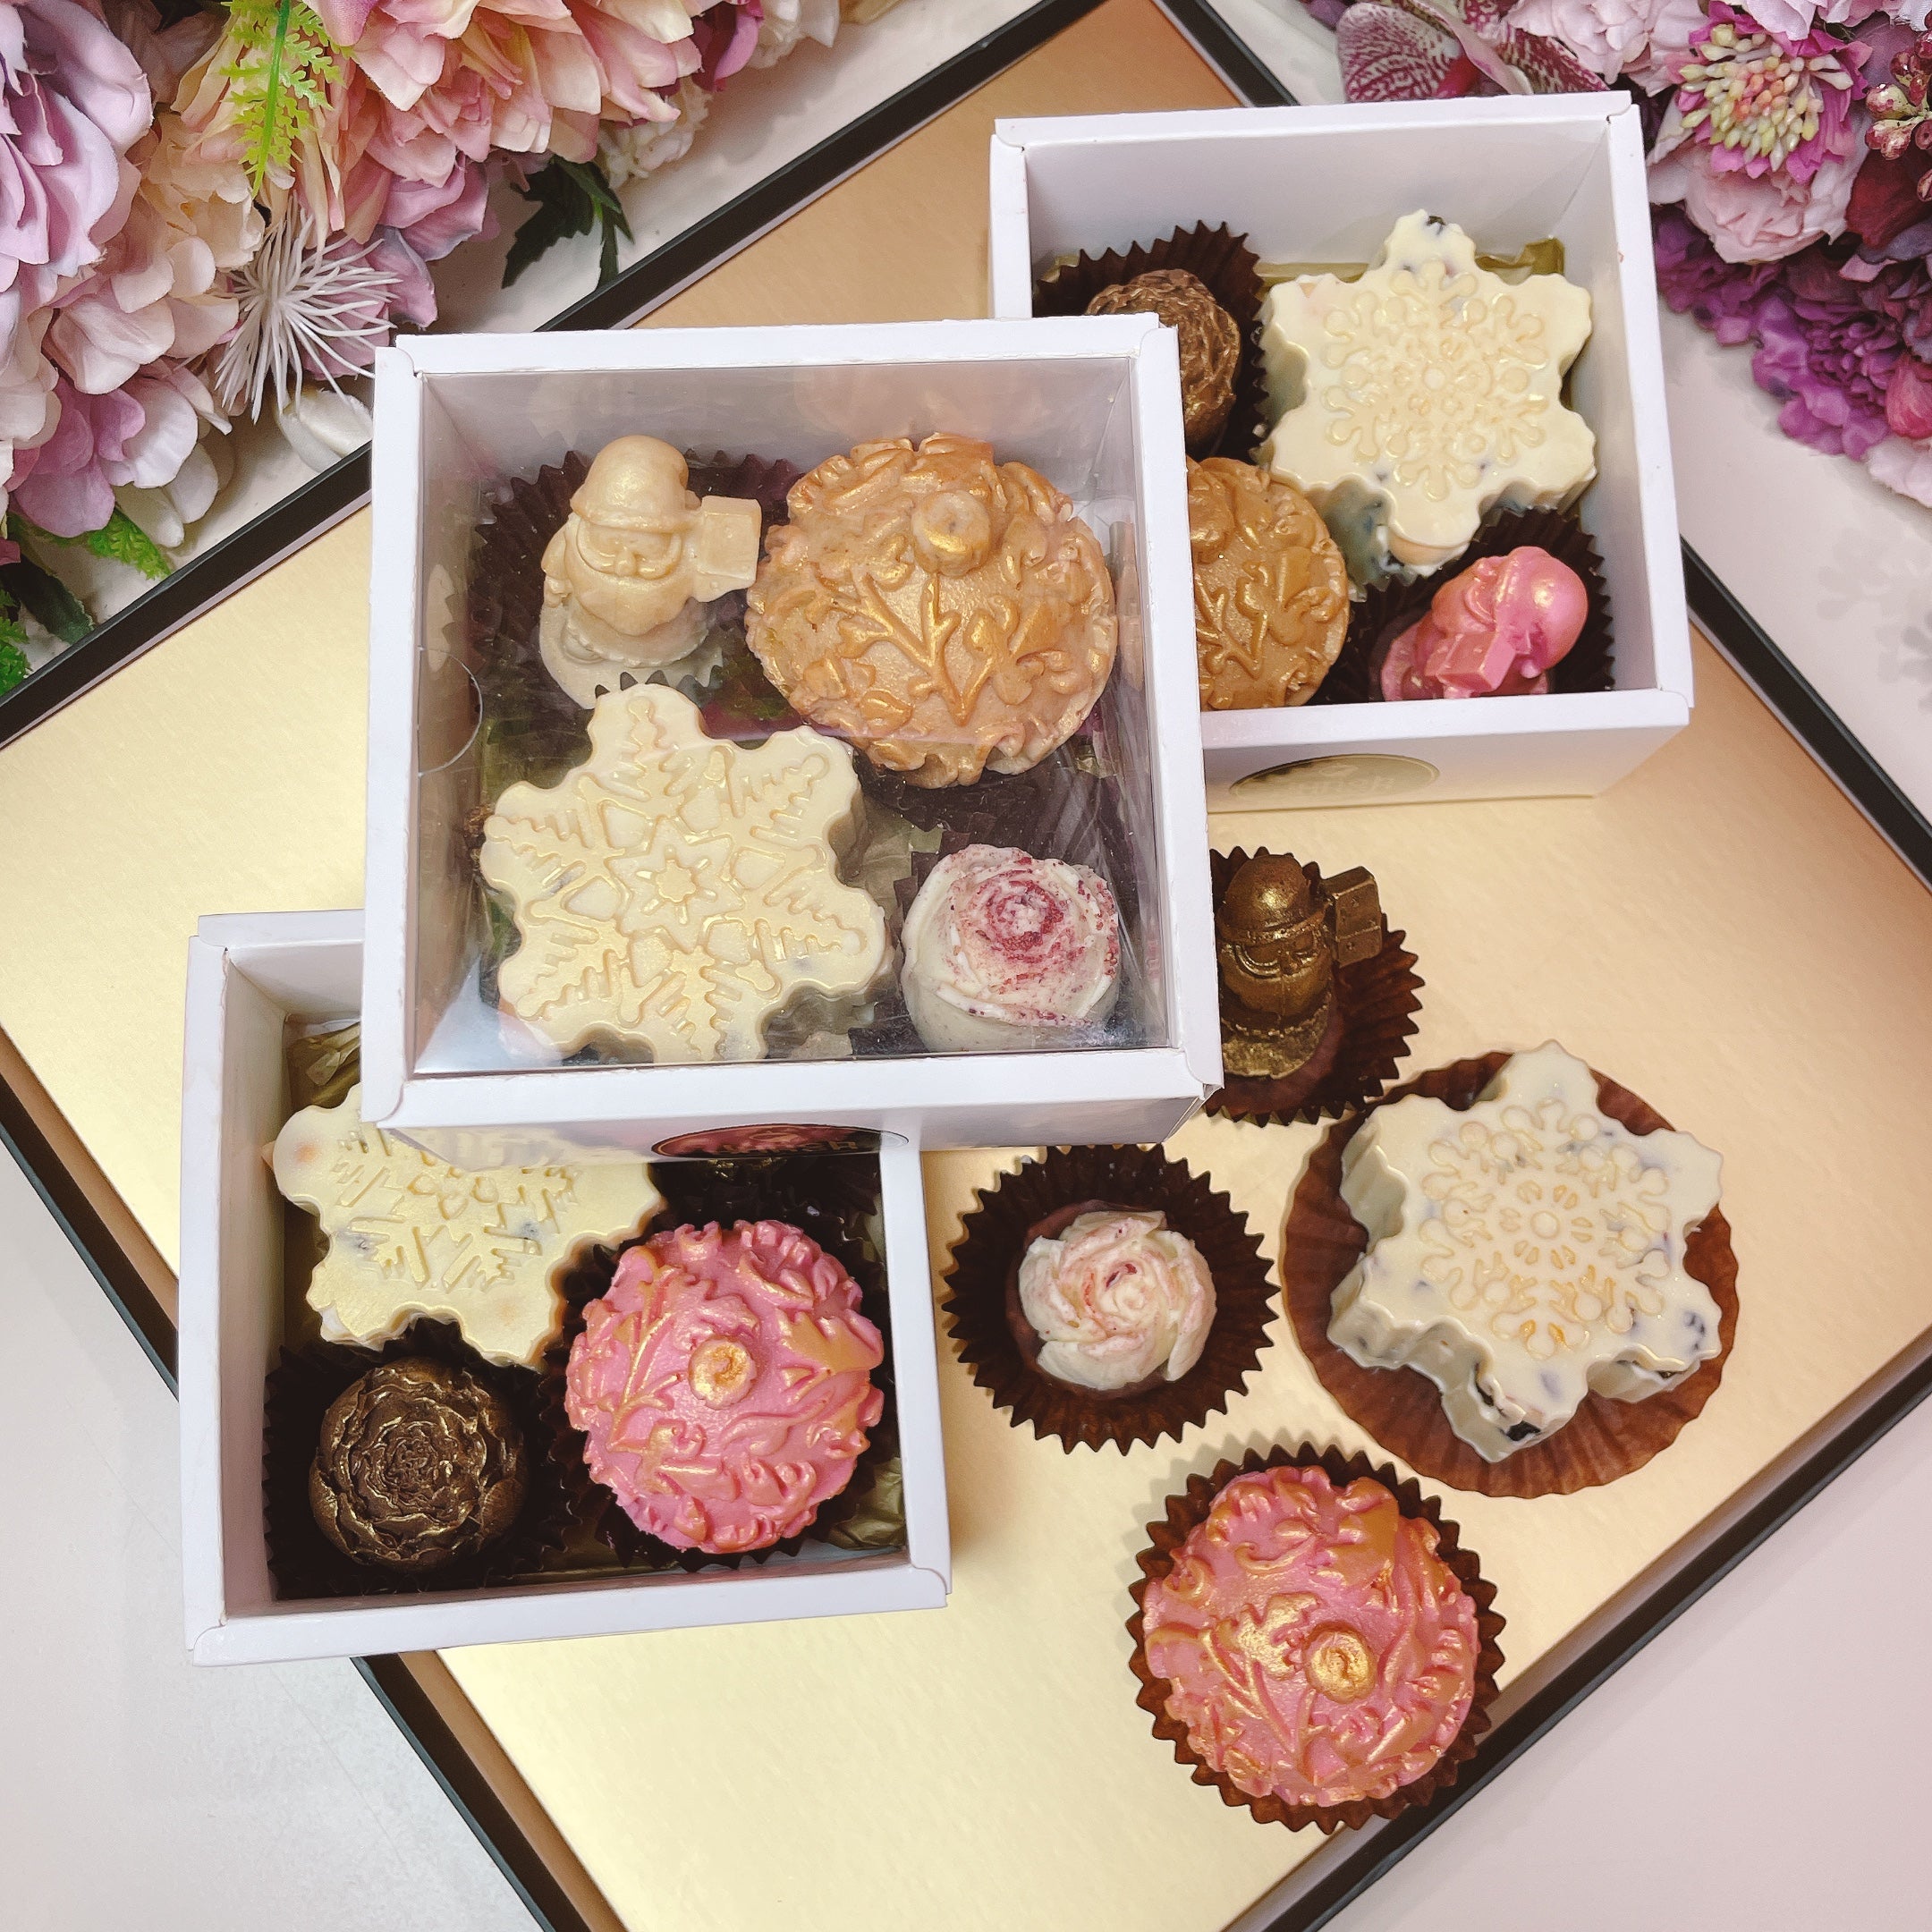 chocolate desert box snowflakes chocolate flowers sweet gift box chocolate box chocolate present Adelaide same day delivery